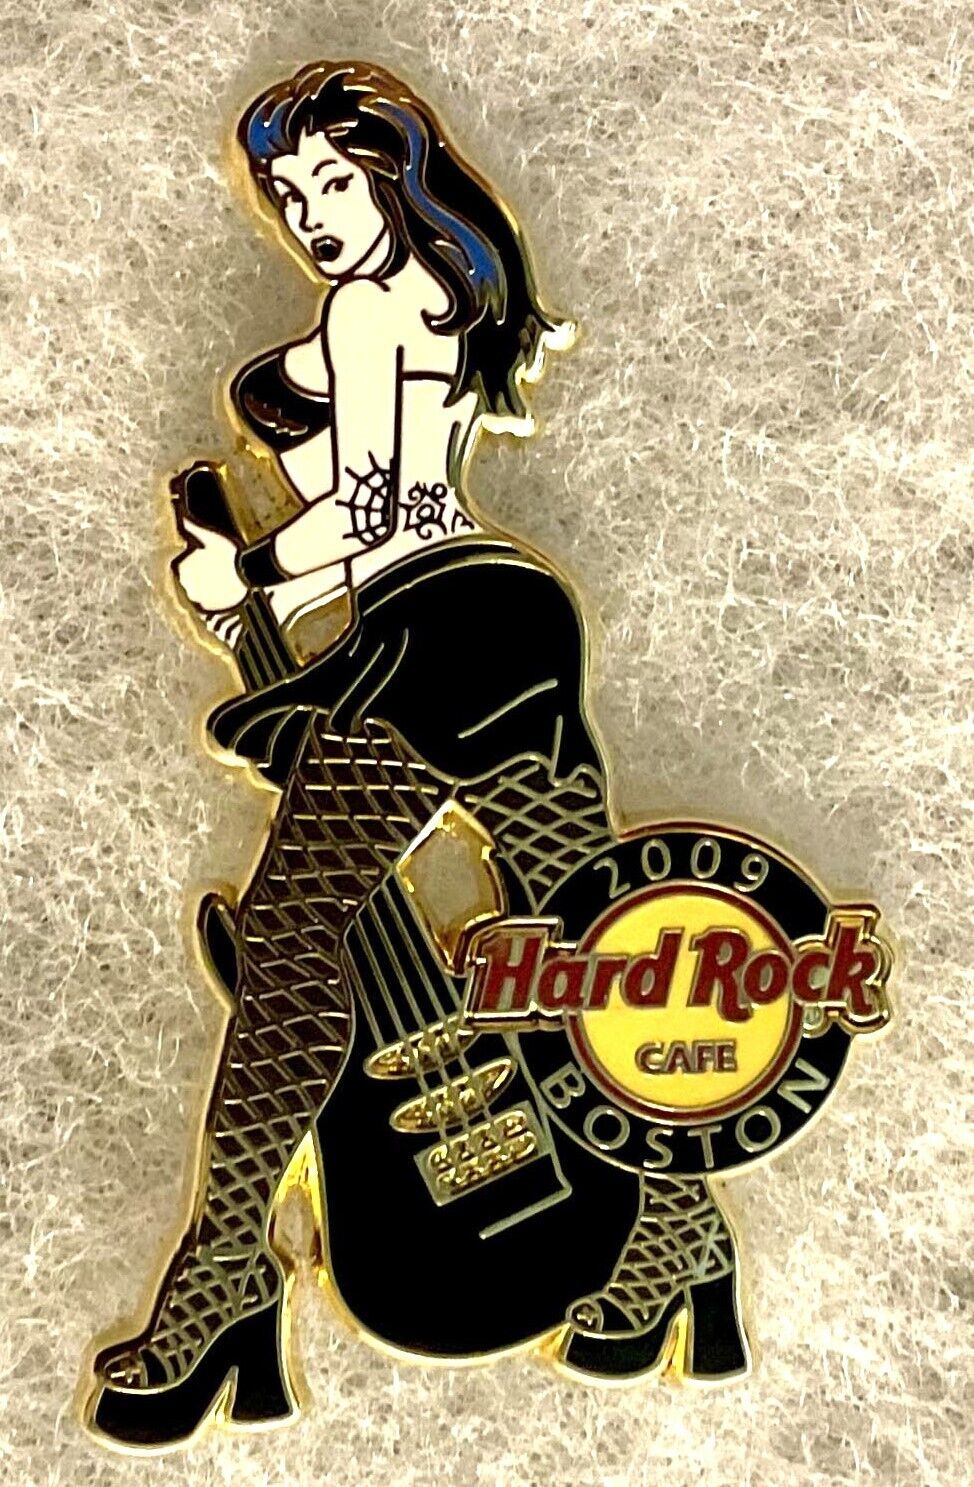 HARD ROCK CAFE BOSTON SEXY ROCK GIRL DRESSED IN BLACK WITH GUITAR PIN # 47790